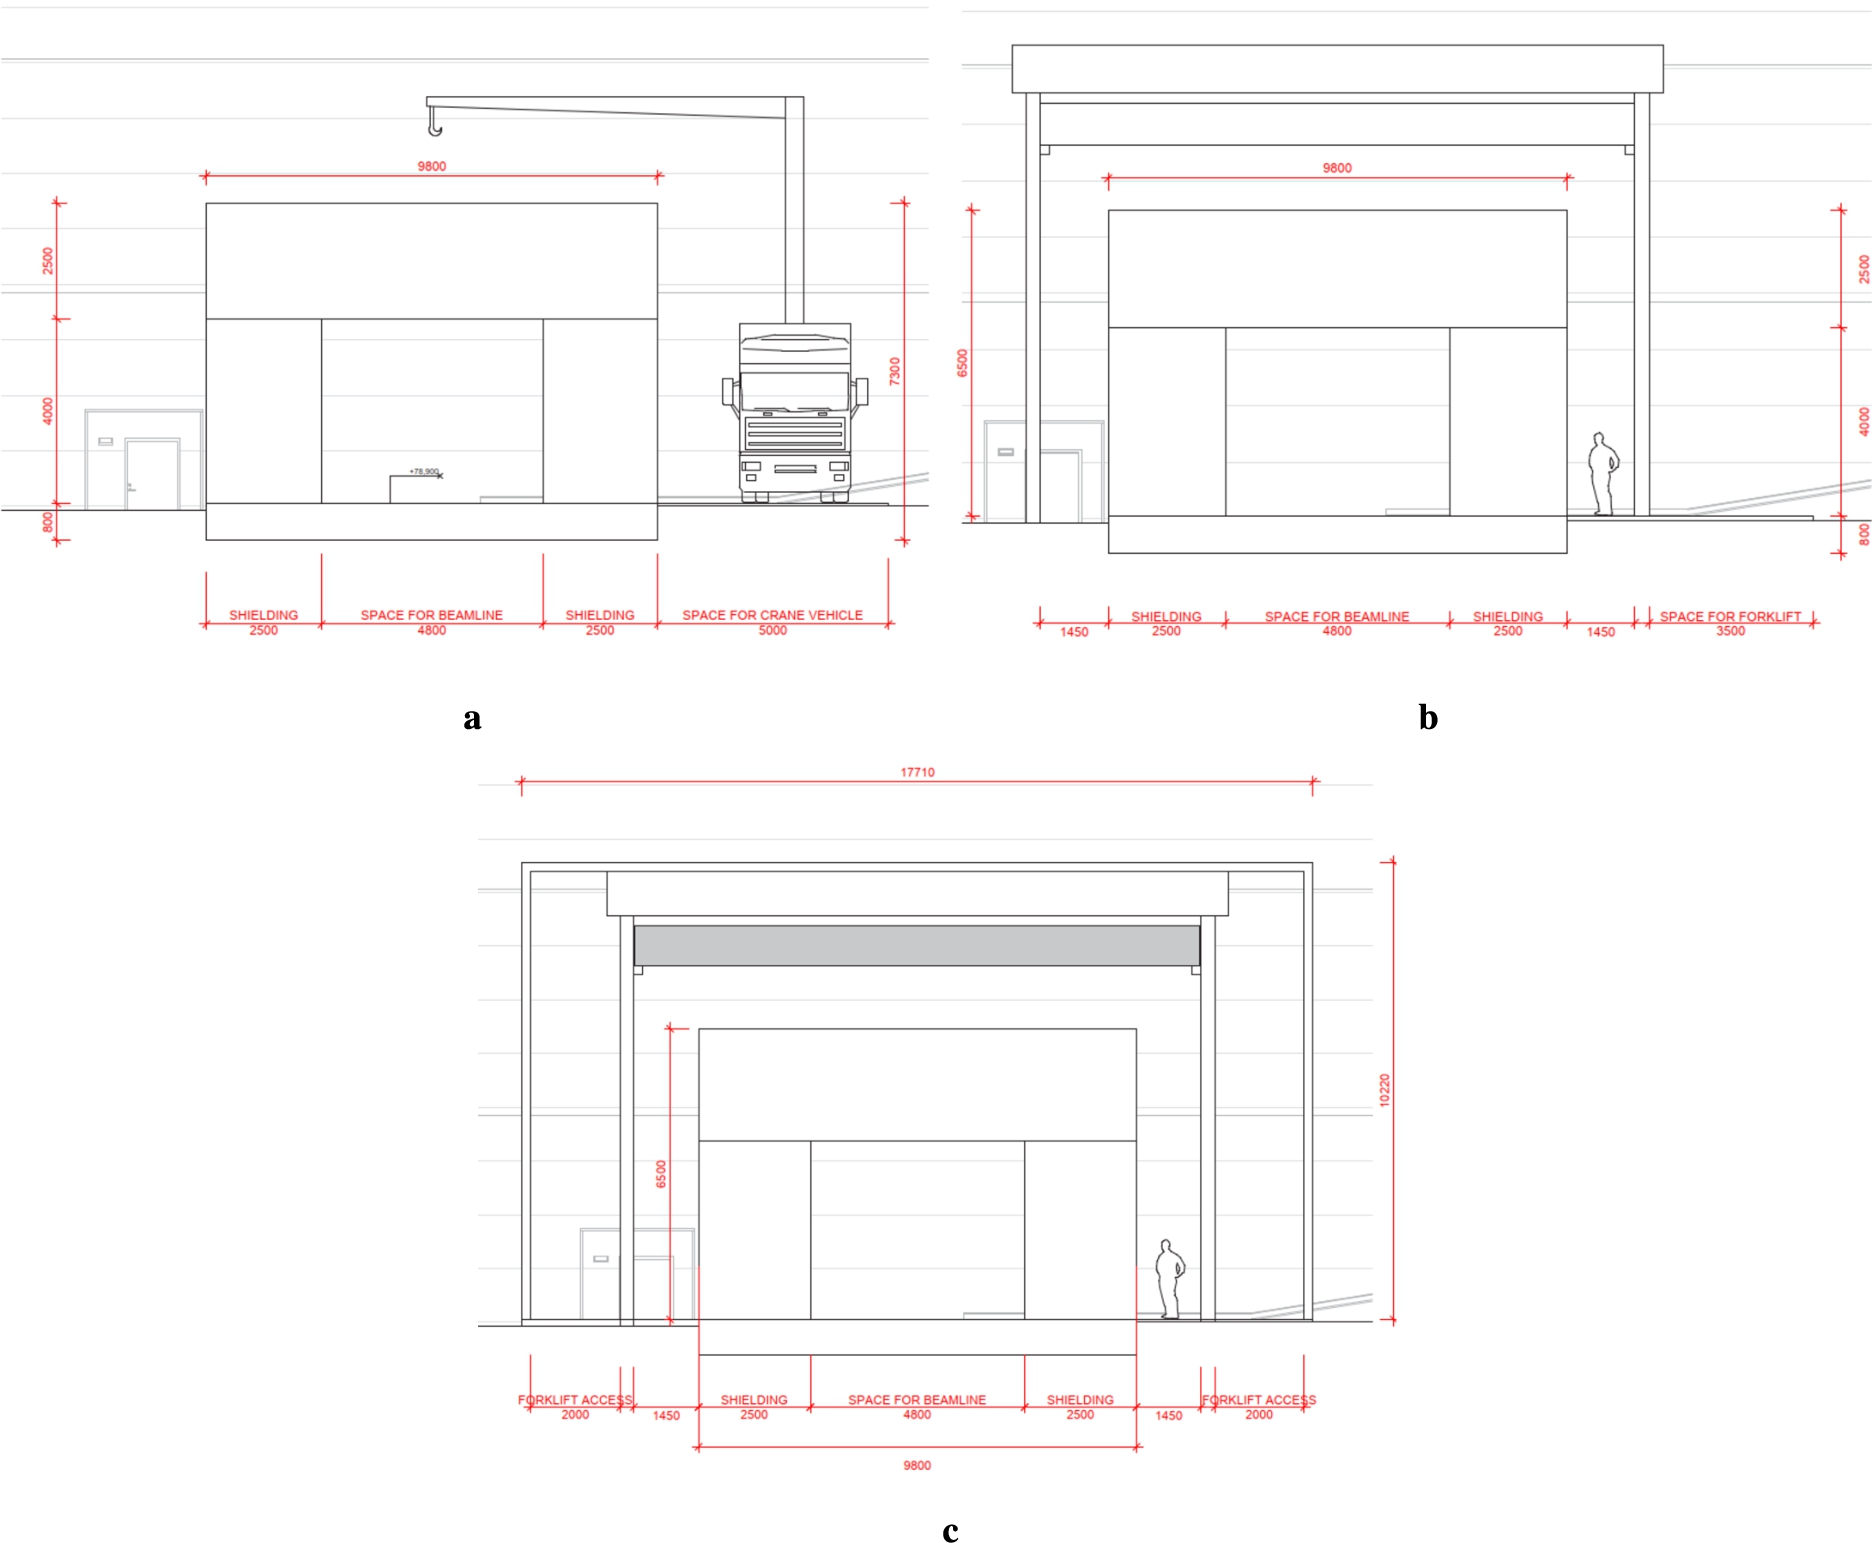 Different options for the NNBAR tunnel structure. A: shielding without weather protection and a crane vehicle. B: shielding and traverse-crane with roof. C: shielding, traverse-crane and full weather protection.